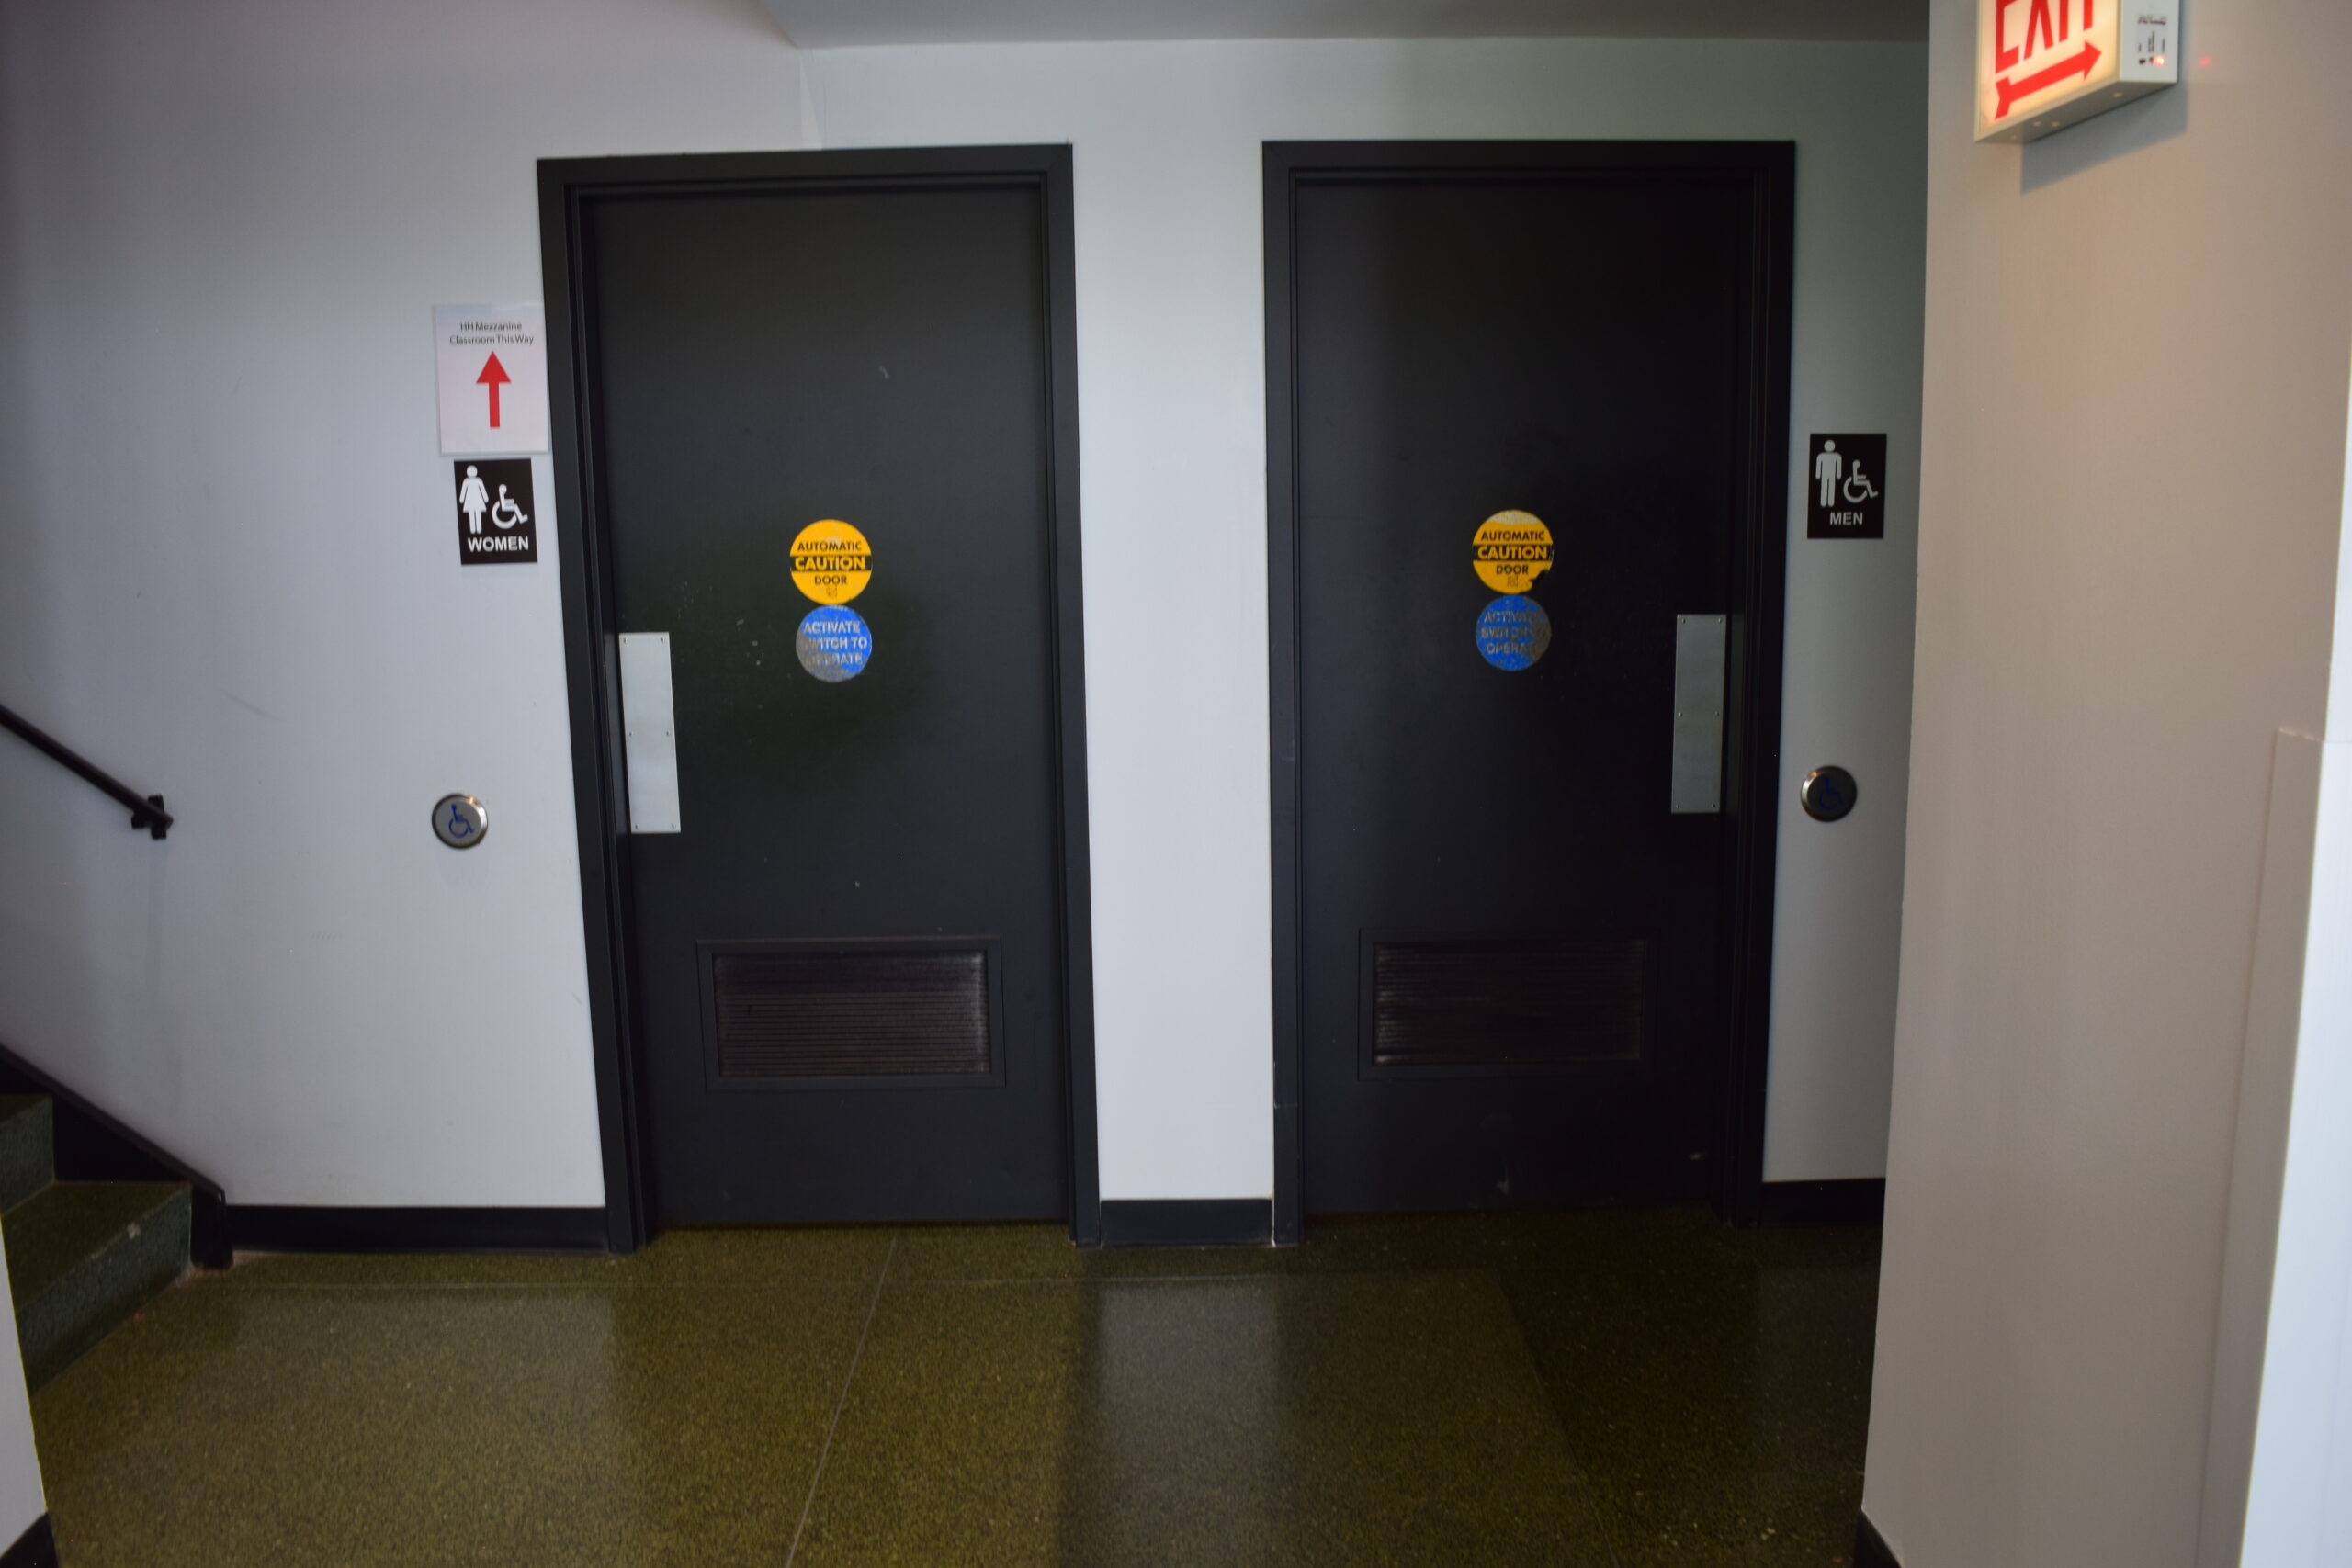 A pair of doors with push plates. The left door has a sign that says "Women" and has female and accessibility icons. The right door has a sign that says "Men" and has male and accessibility icons.